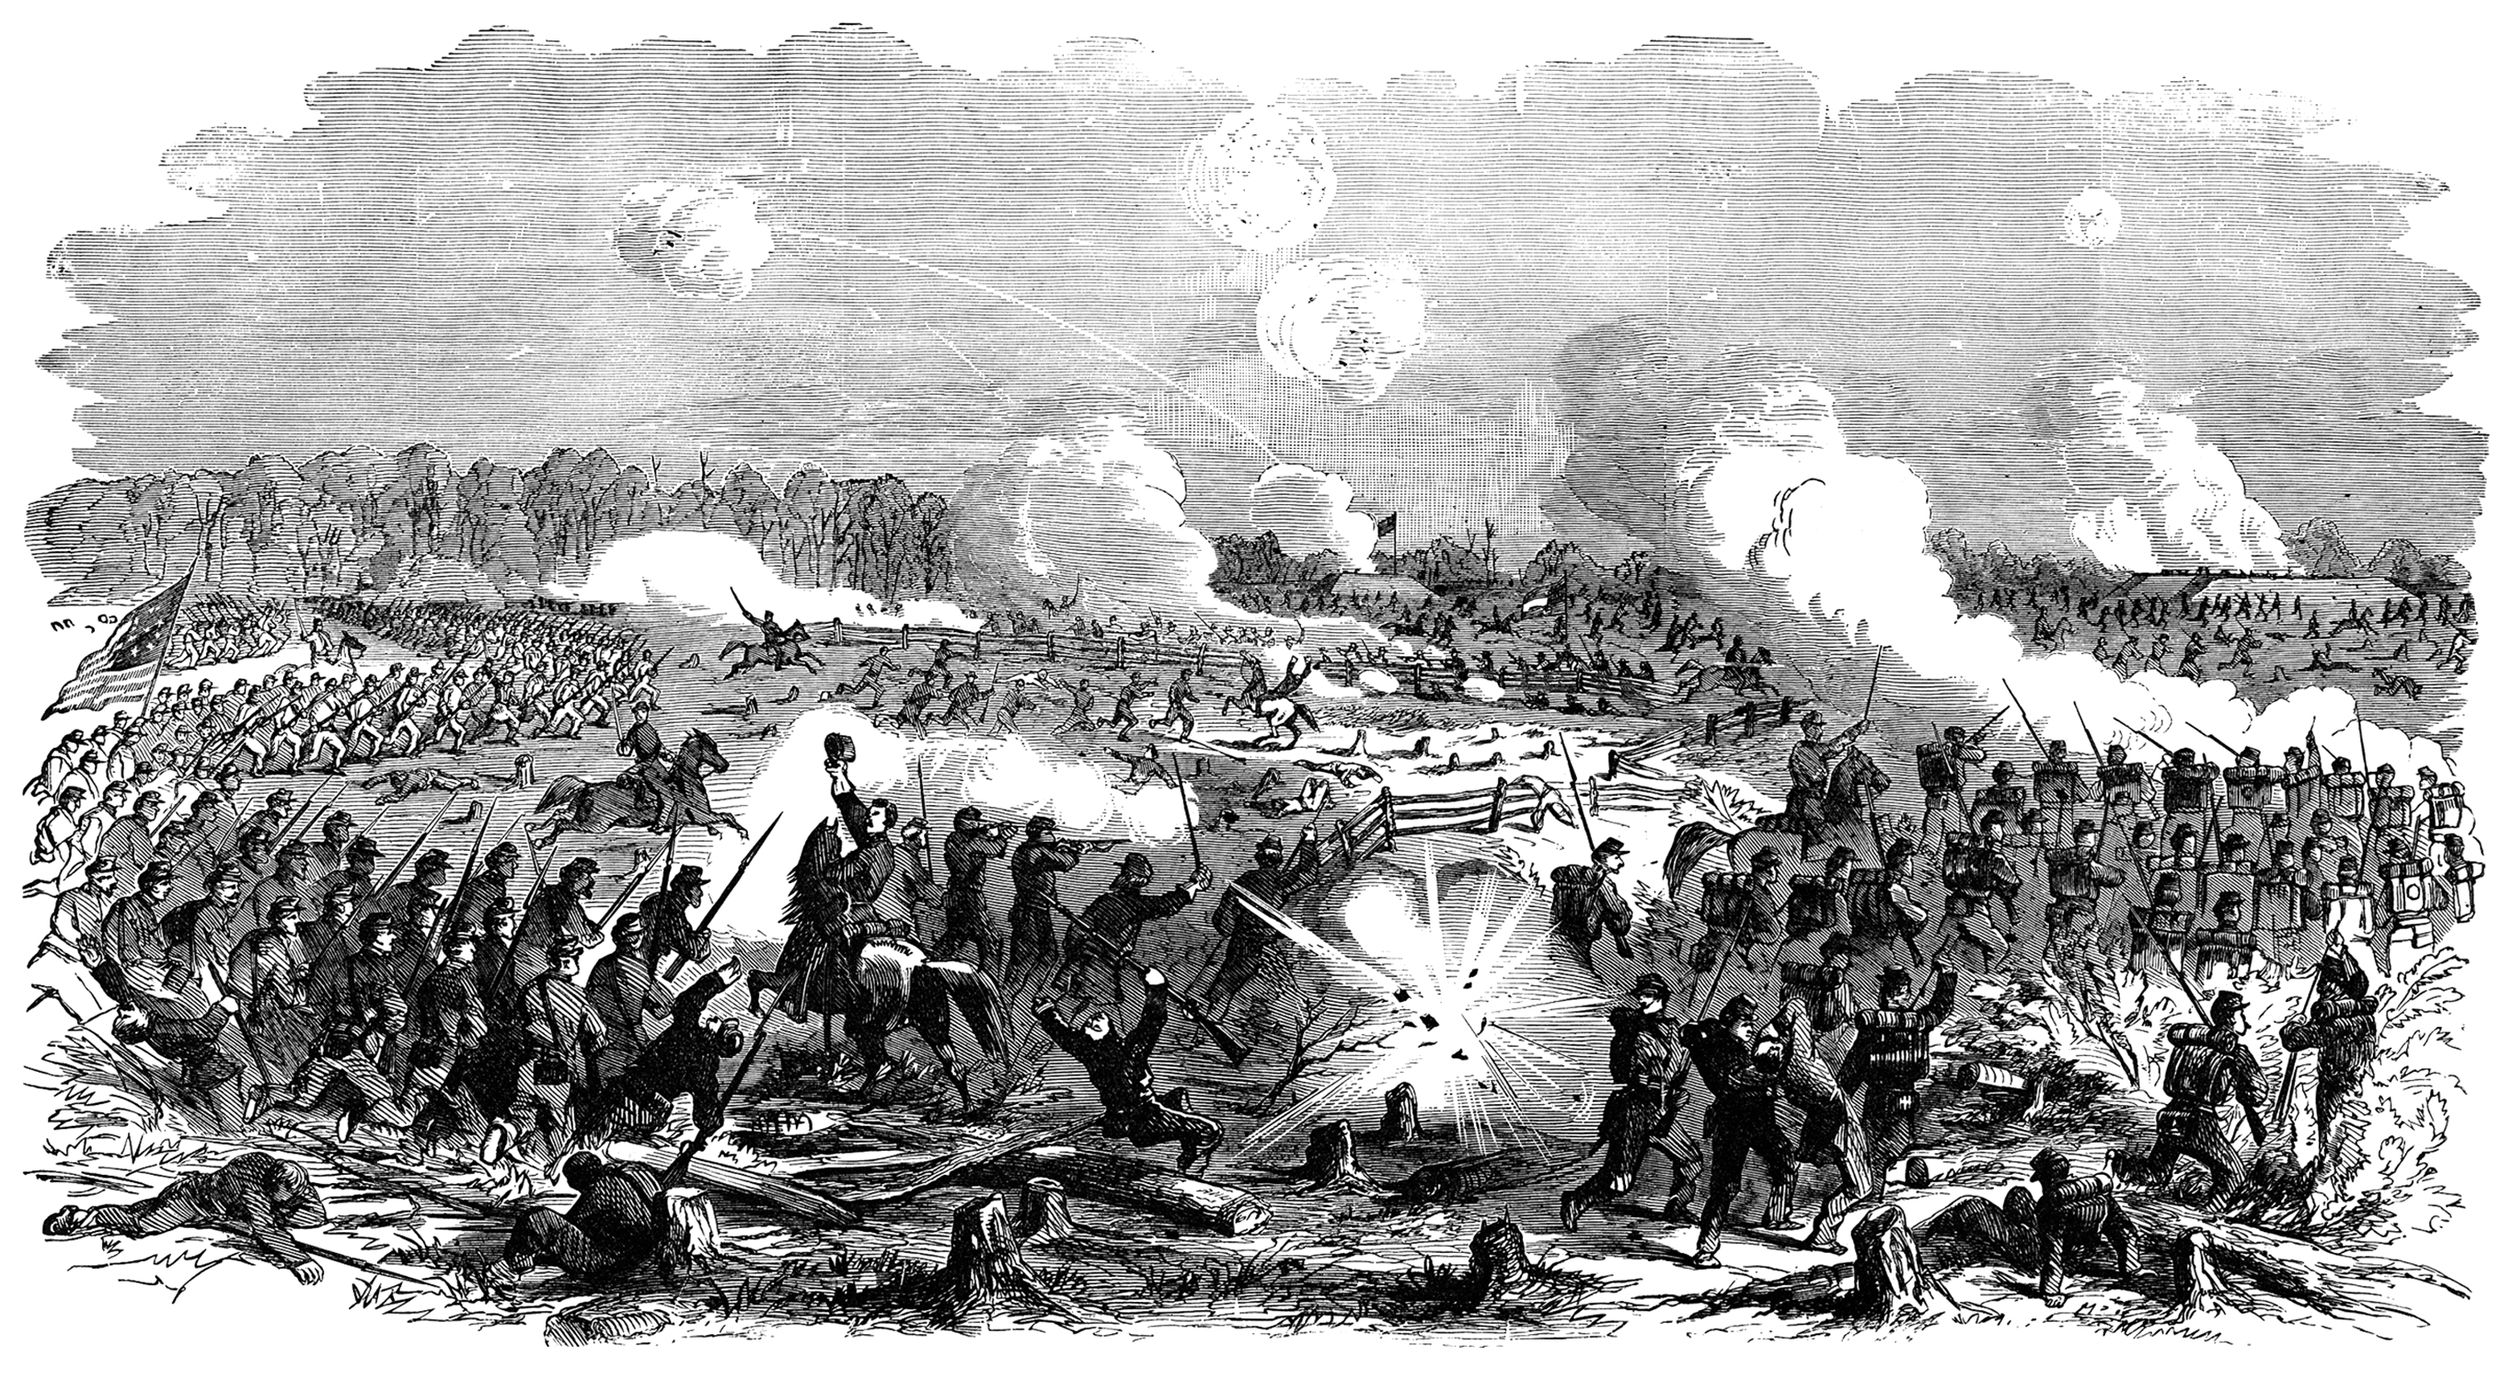 The Battle of Williamsburg May,1862, depicted in this illustration from Frank Leslie Famous Leaders and Battle Virginia Scenes of the Civil War, published in 1896. It was here that the young artillery officer John Pelham first drew praise for his “coolness under fire.”